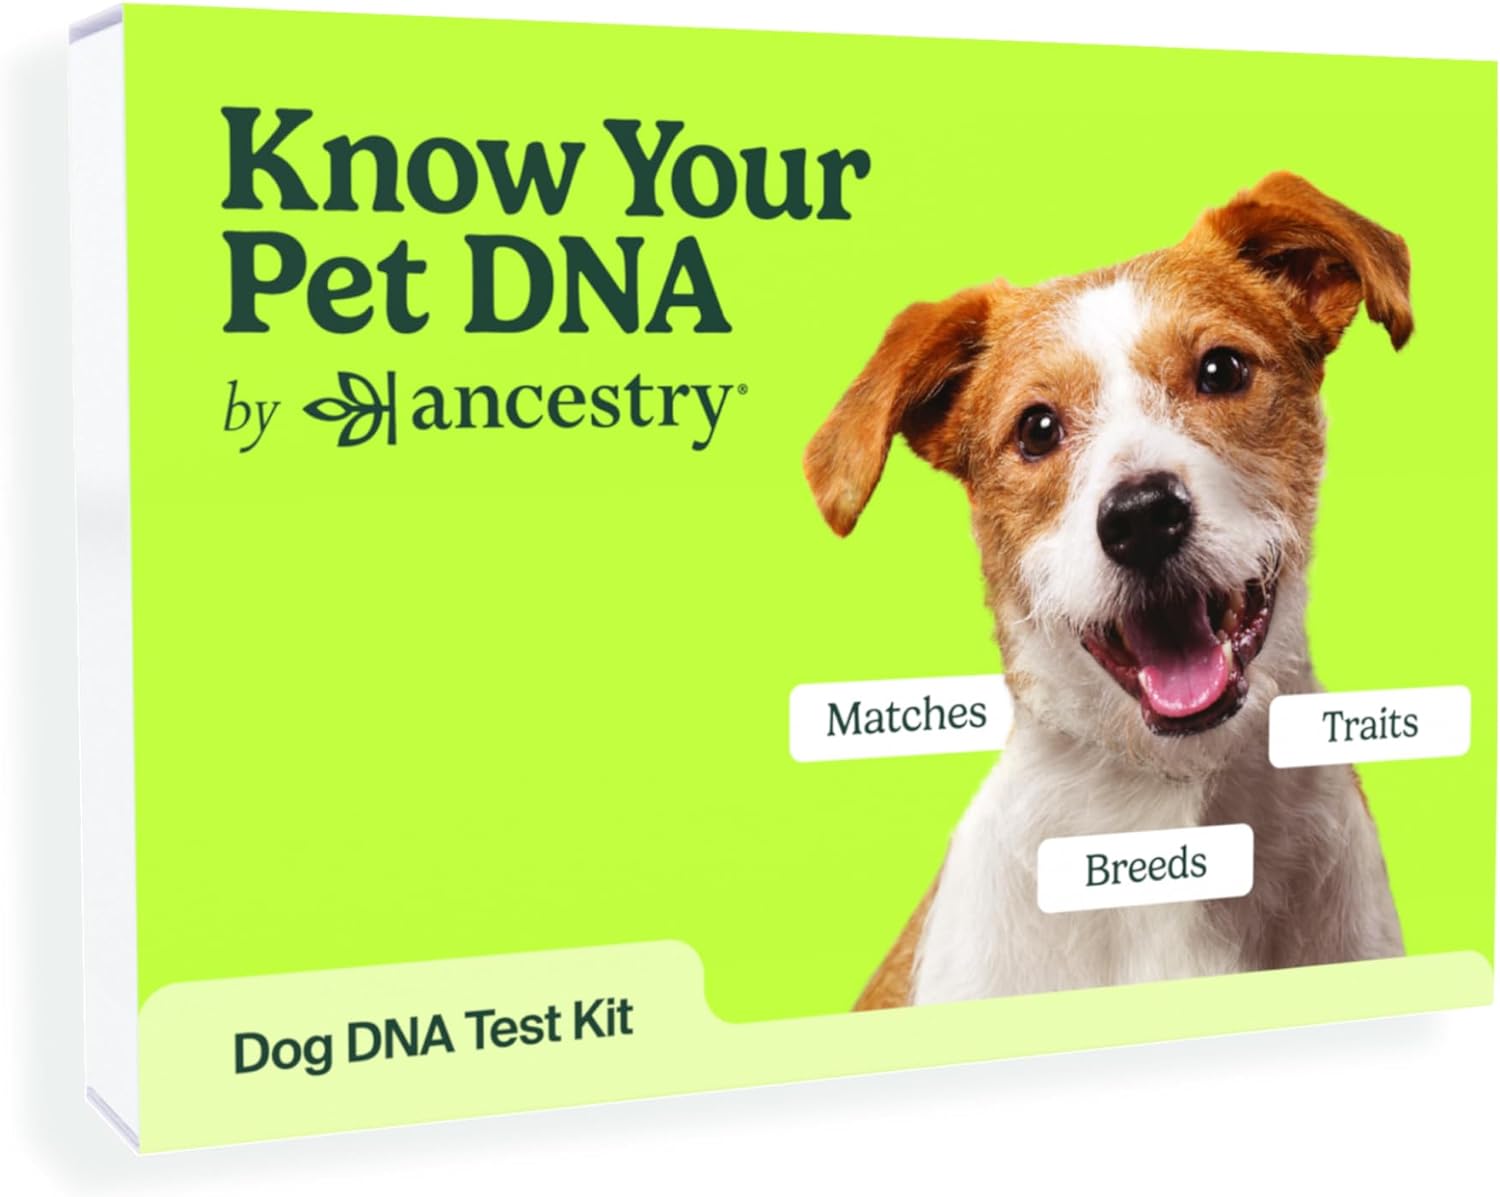 Get Know Your Pet DNA by Ancestry: Dog DNA Breed Identification Test, Genetic Traits, DNA Matches, Dog DNA Test, regularly $99.00 USD, for just $69.00 USD! 